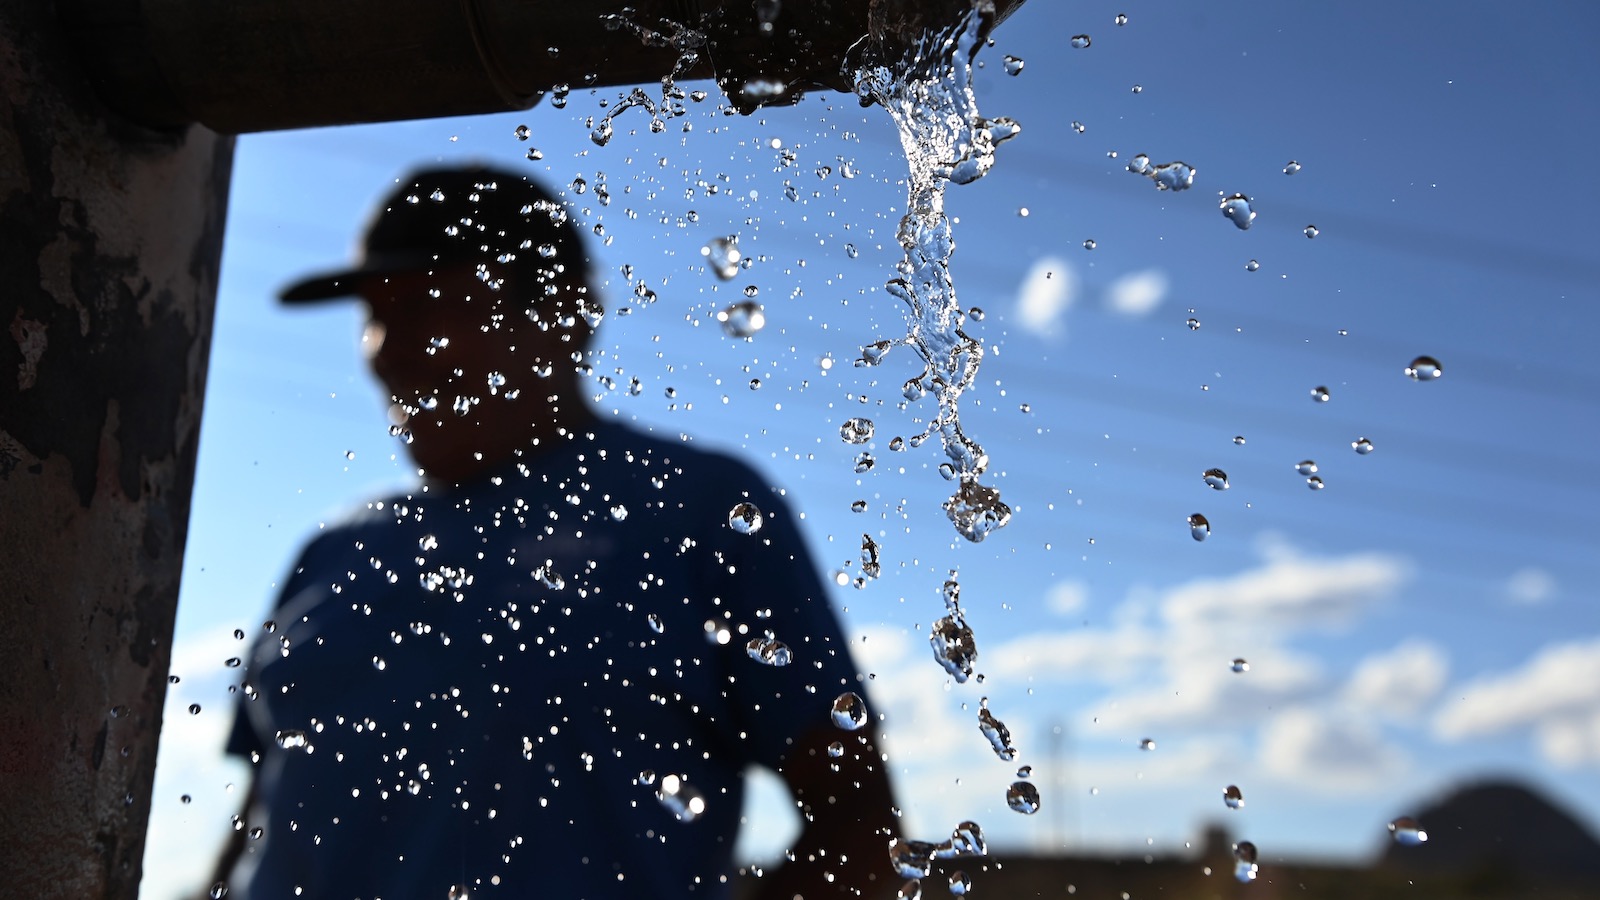 A Navajo man, shown in silhouette, fills a water tank in the back of his truck.